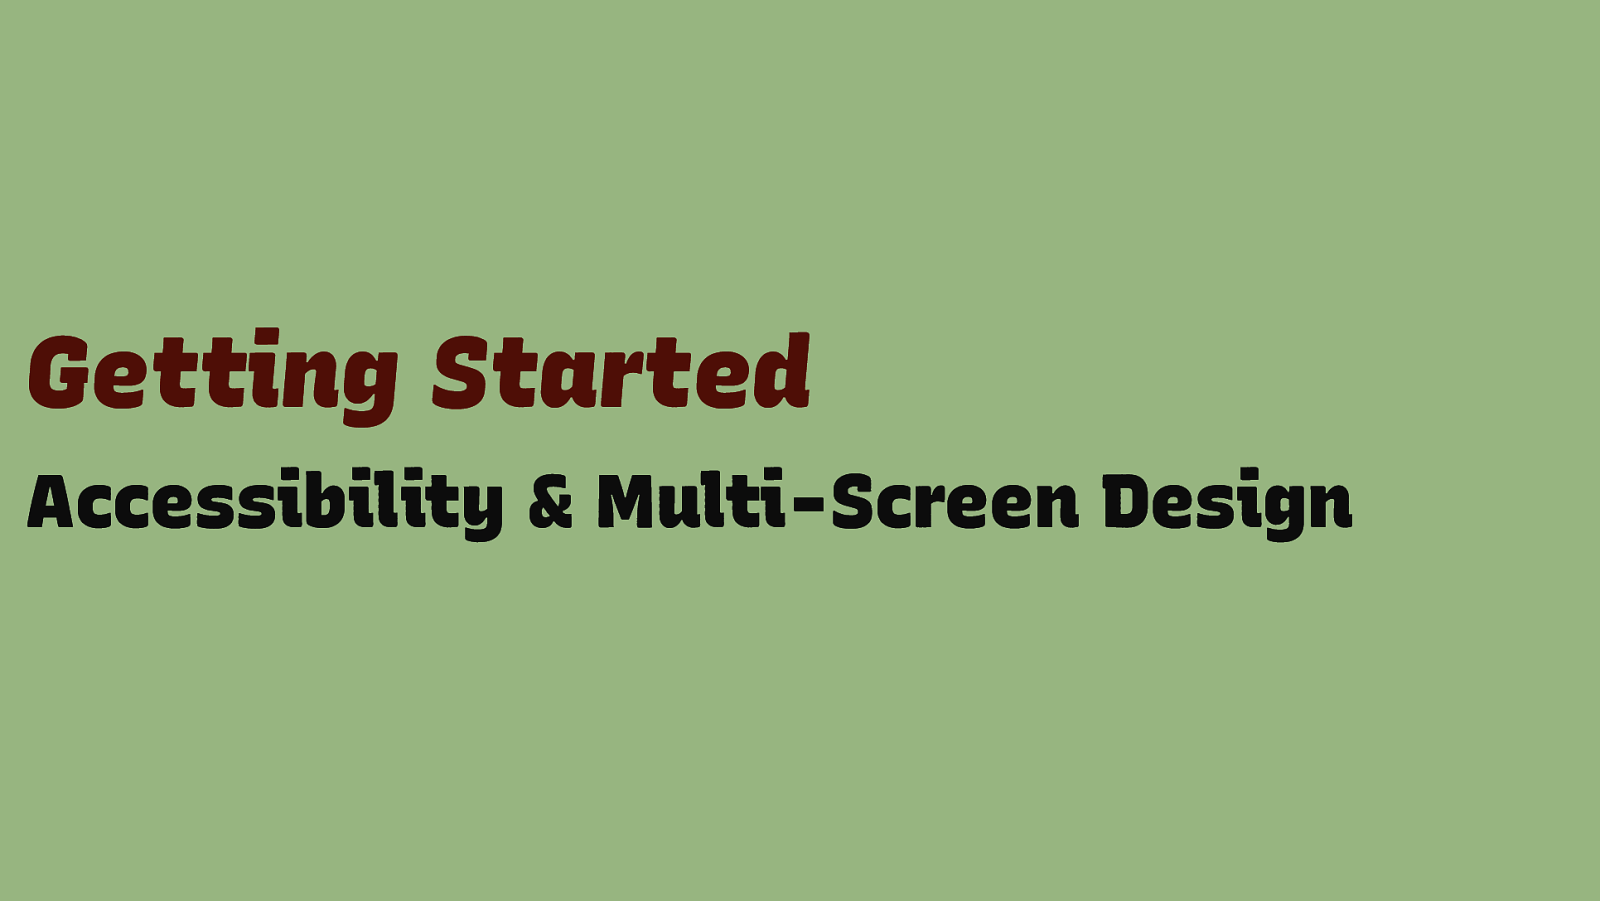 Accessibility & Multi-Screen Design: Getting Started